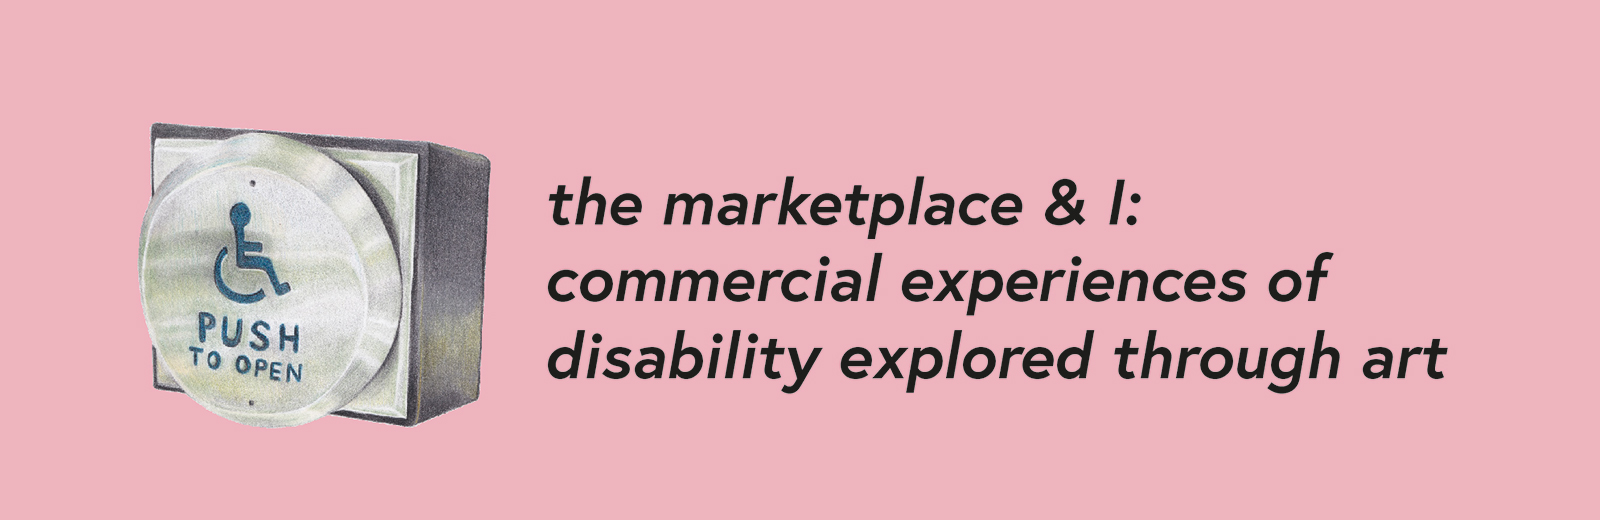 The Marketplace and I: Commercial experiences of disability explored through art